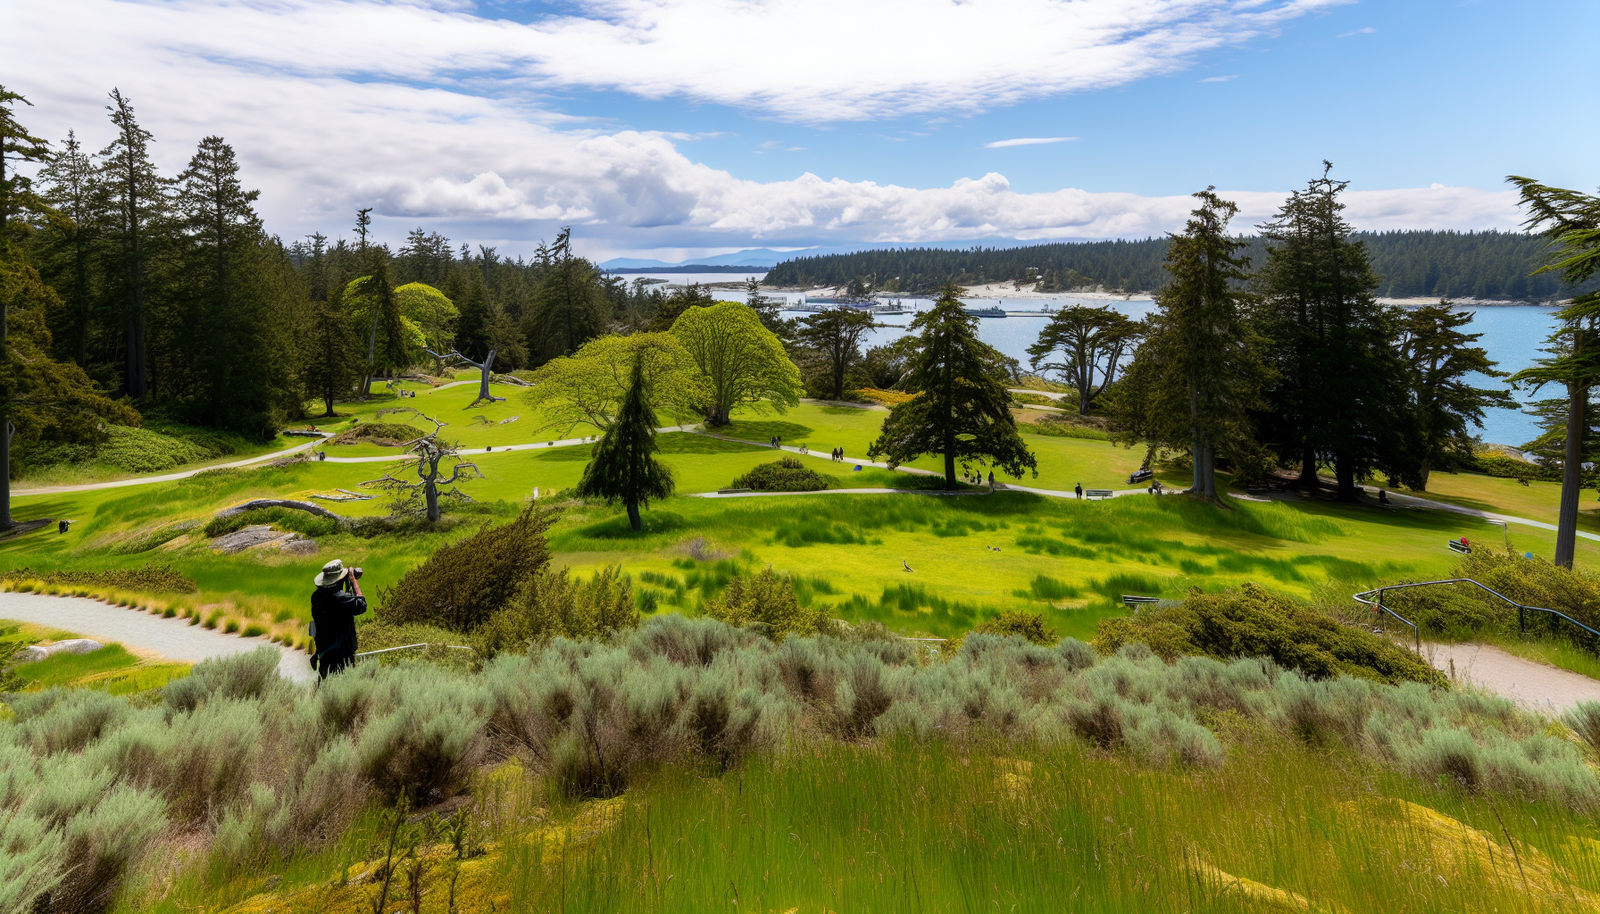 Scenic view of a park with lush greenery on one of the Gulf Islands accessible via BC Ferries